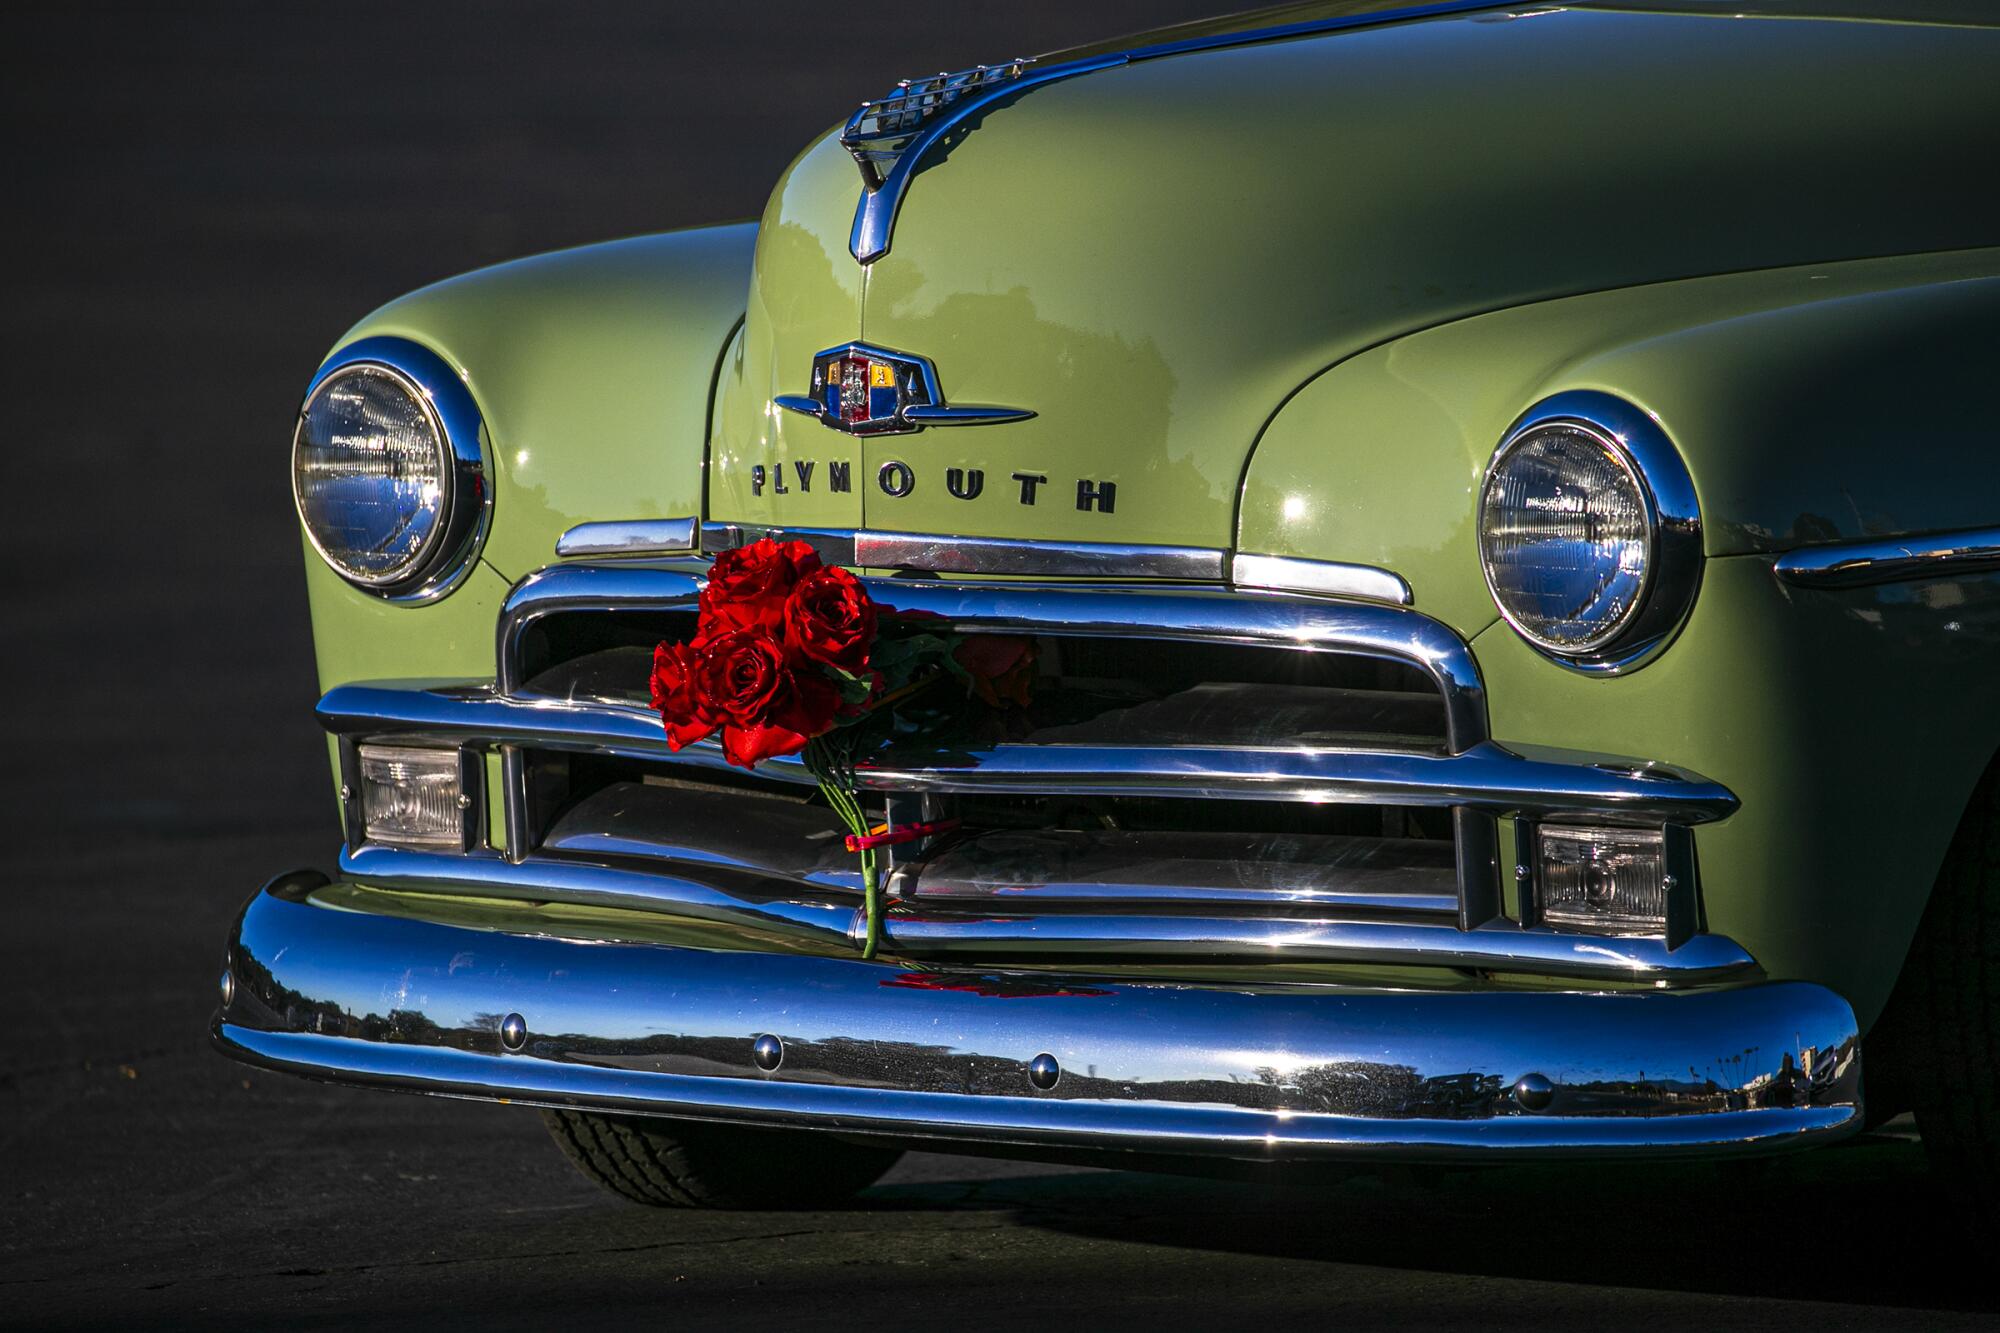 Sultans Car Club of Long Beach decorated their classic cars with roses before driving down Colorado Boulevard.